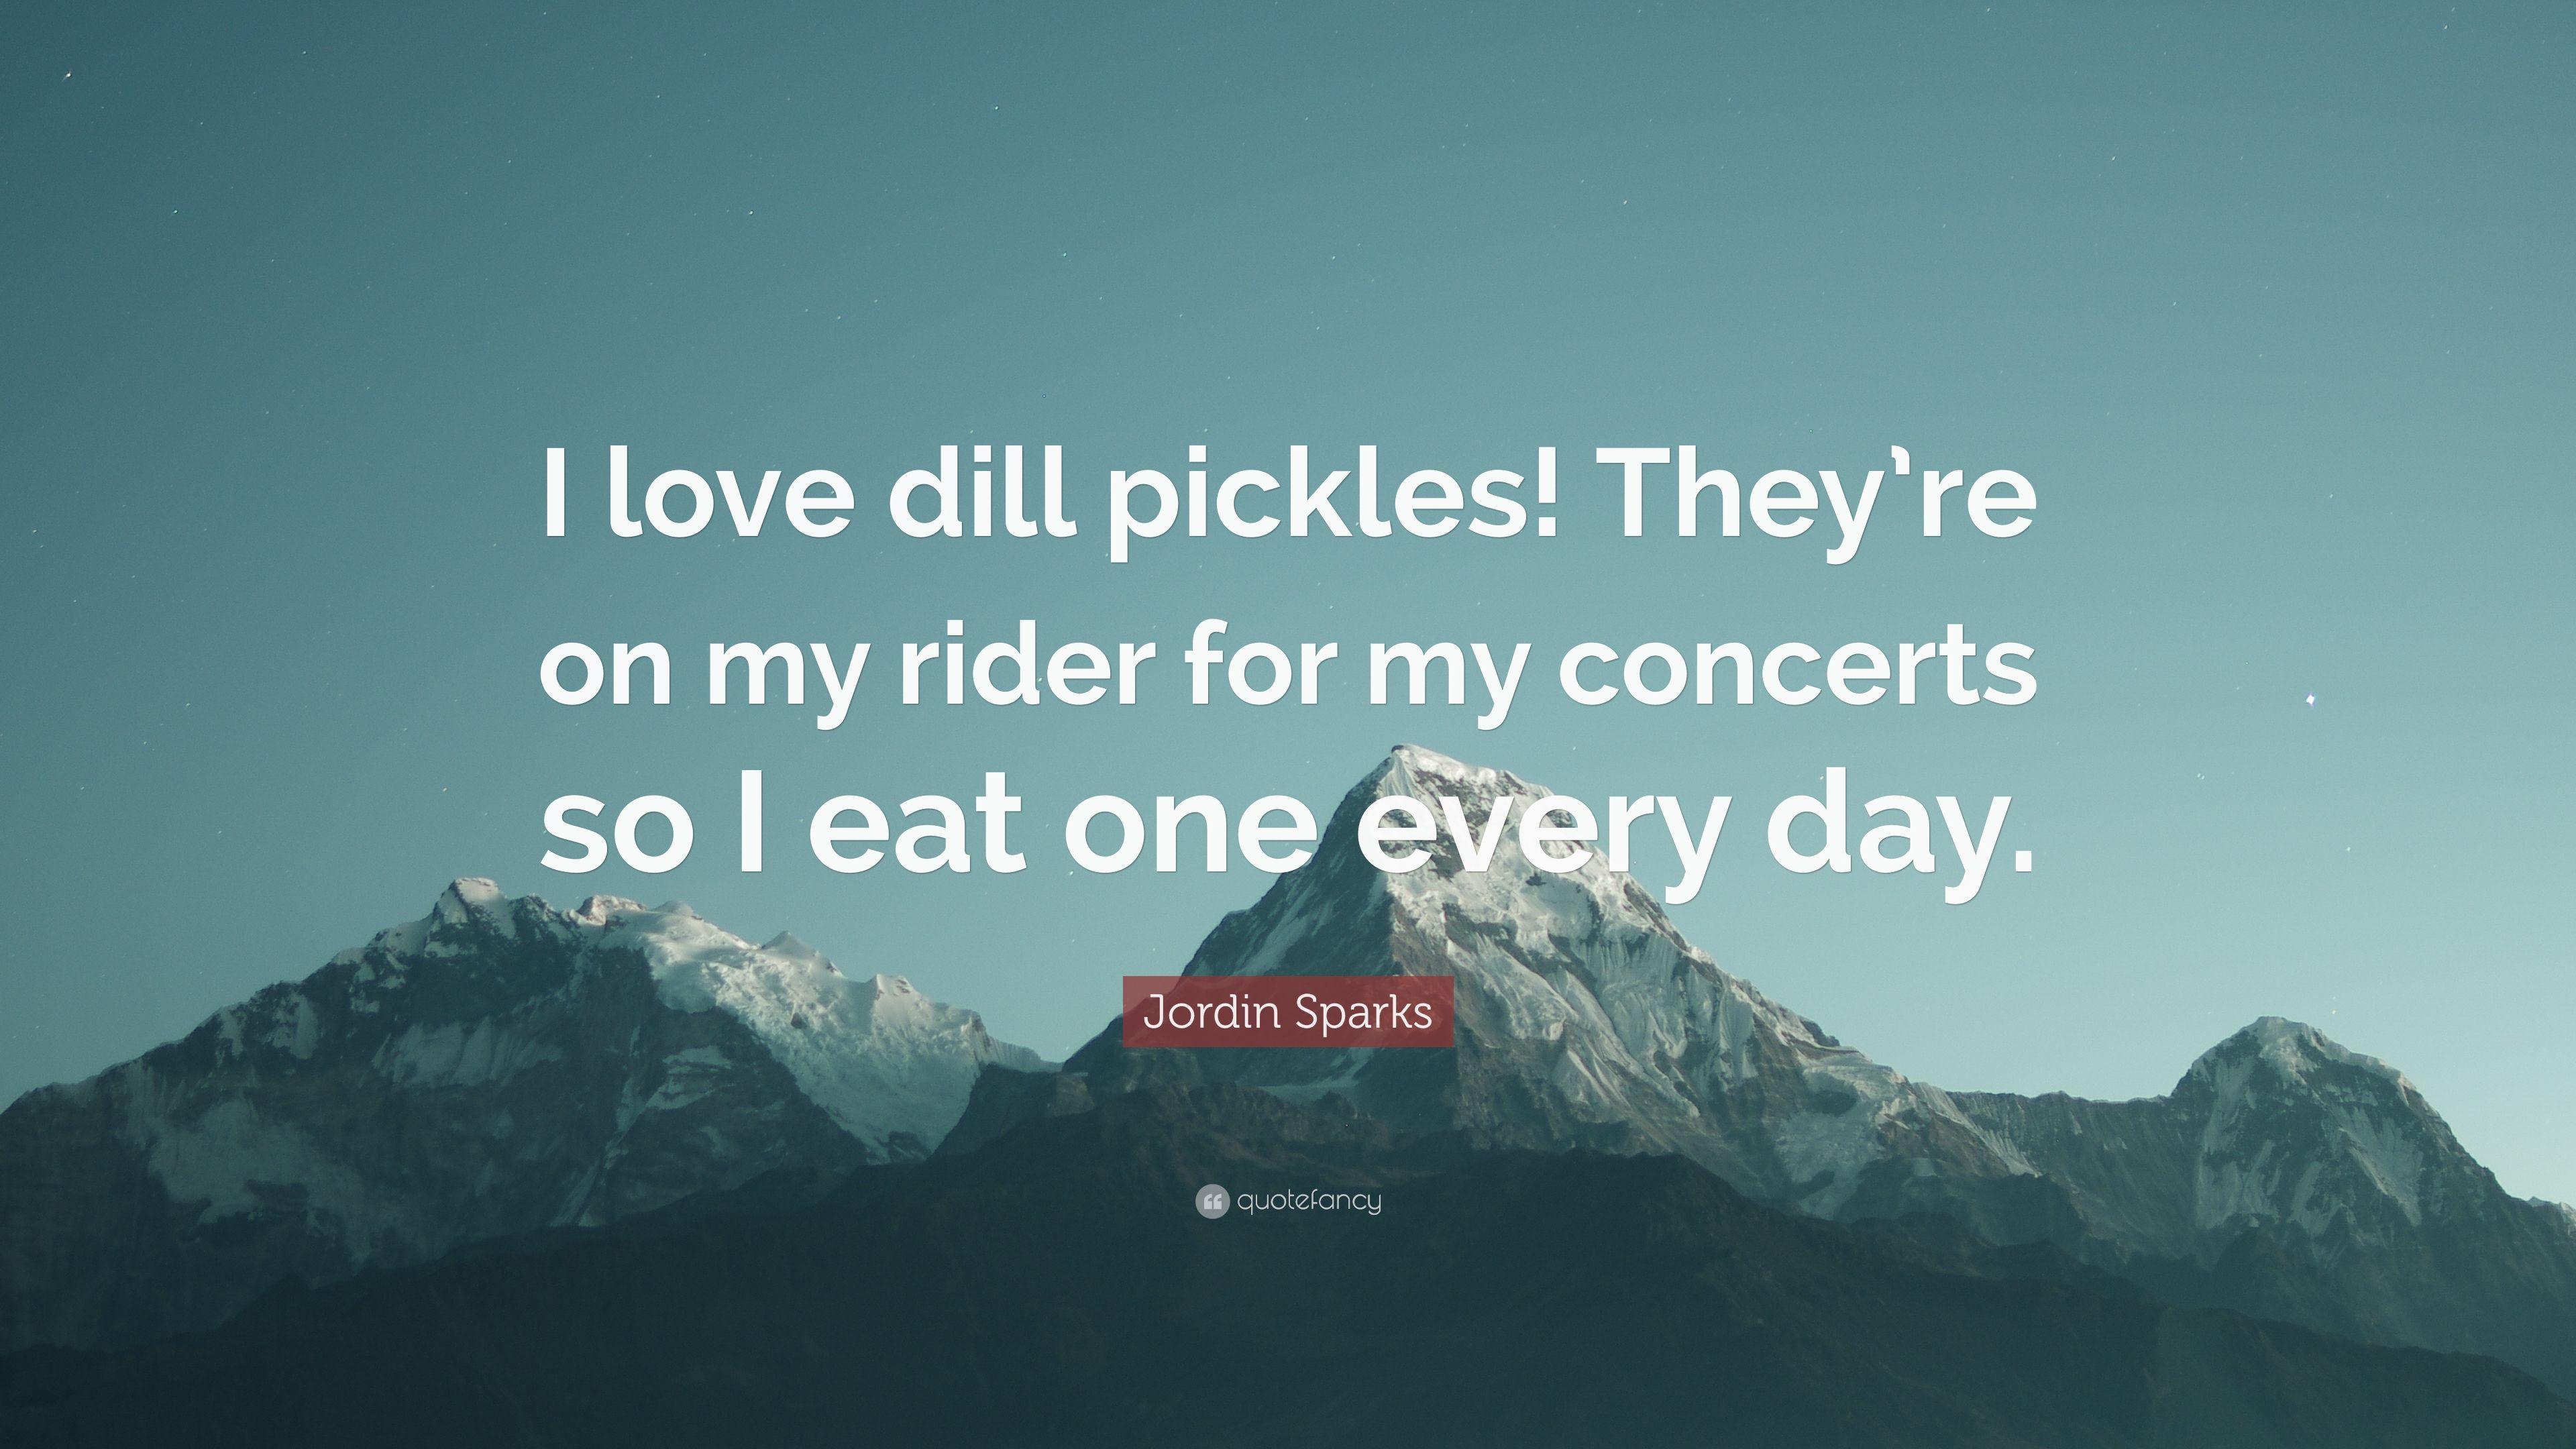 Jordin Sparks Quote: “I love dill pickles! They're on my rider